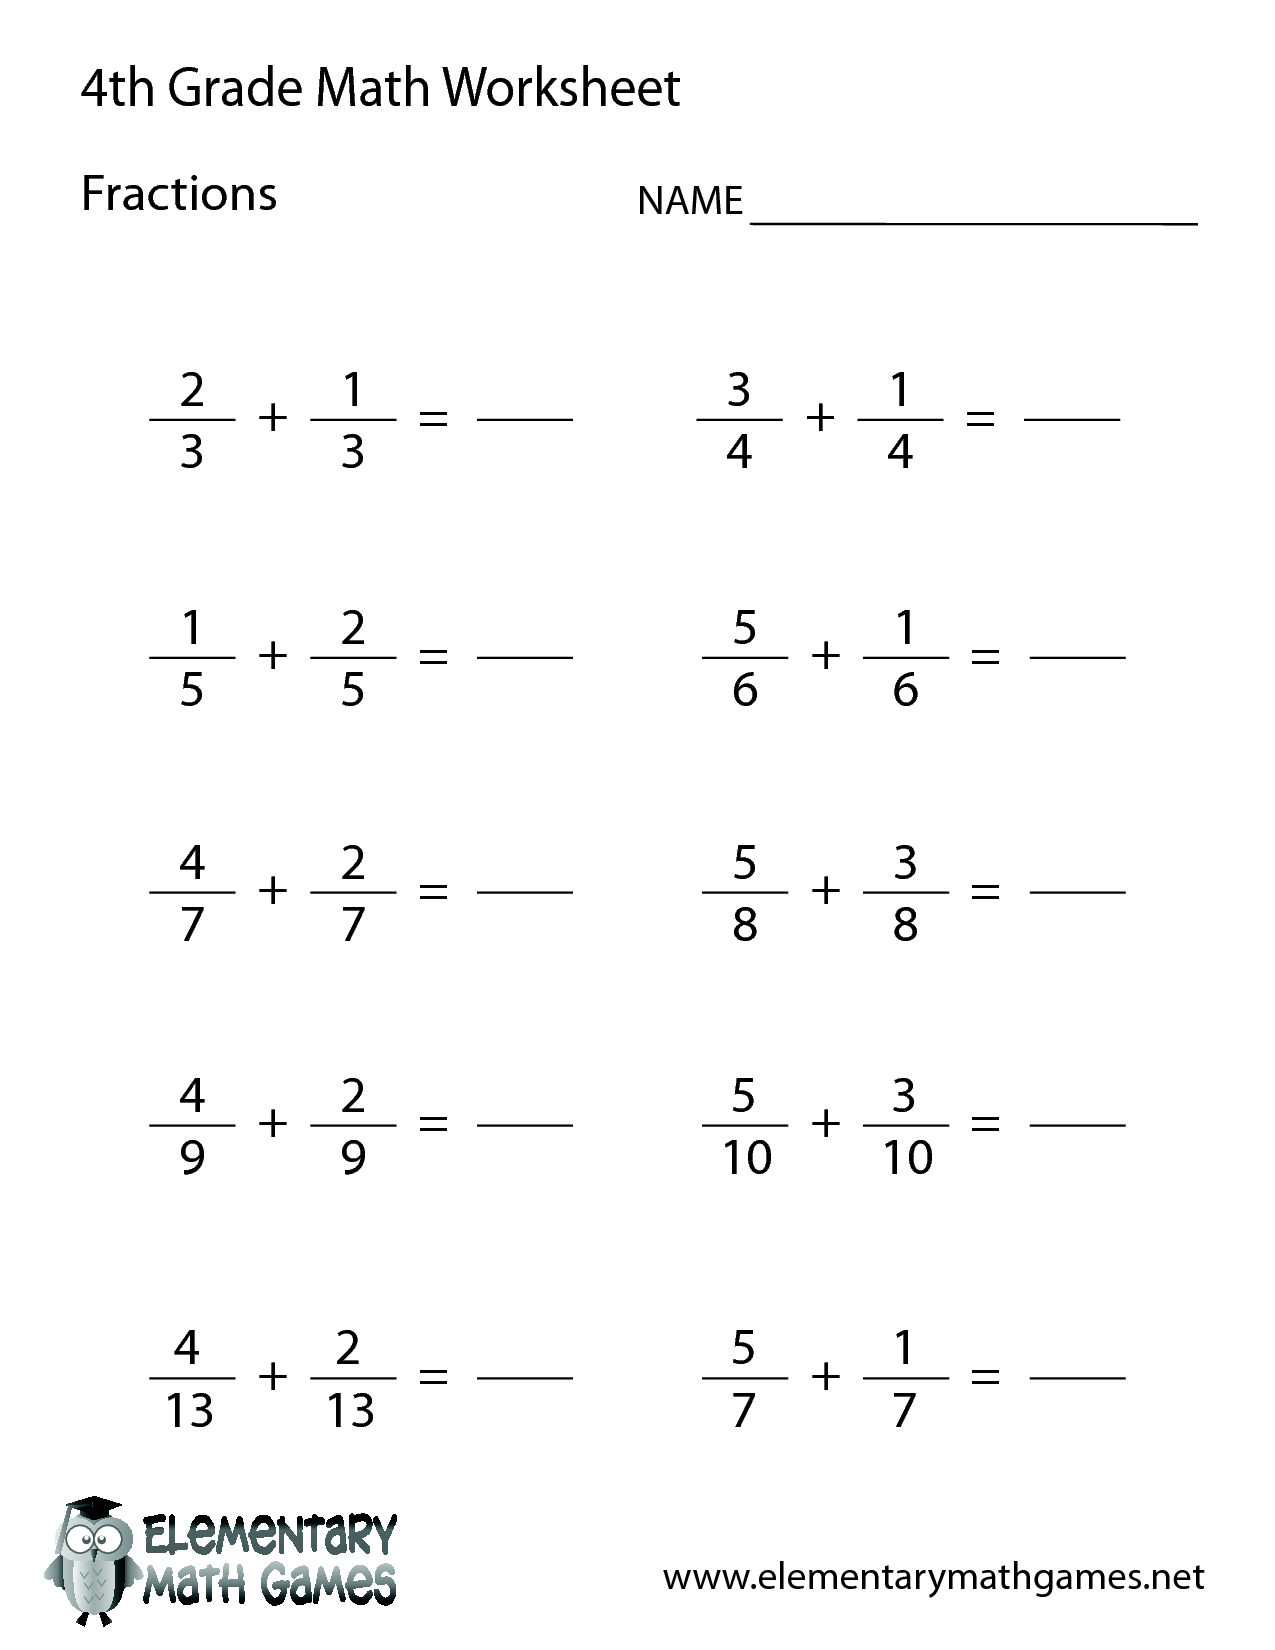 17 Best Images of 4th Grade Math Worksheets Time 4th